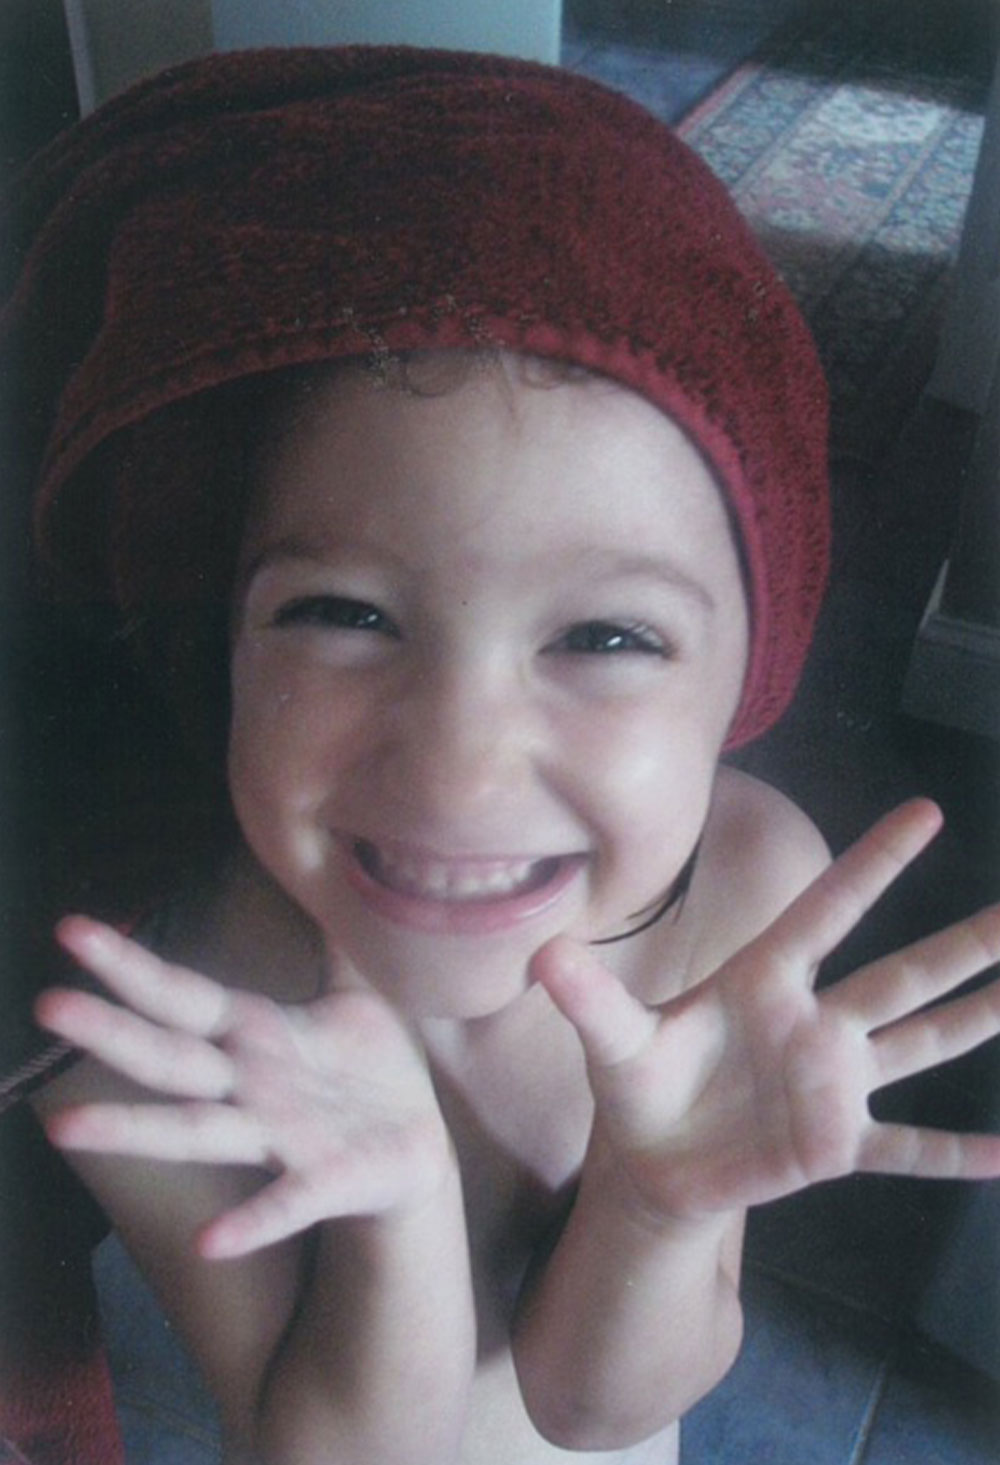 Sadie smiling with a towel on her head and holding her fingers up